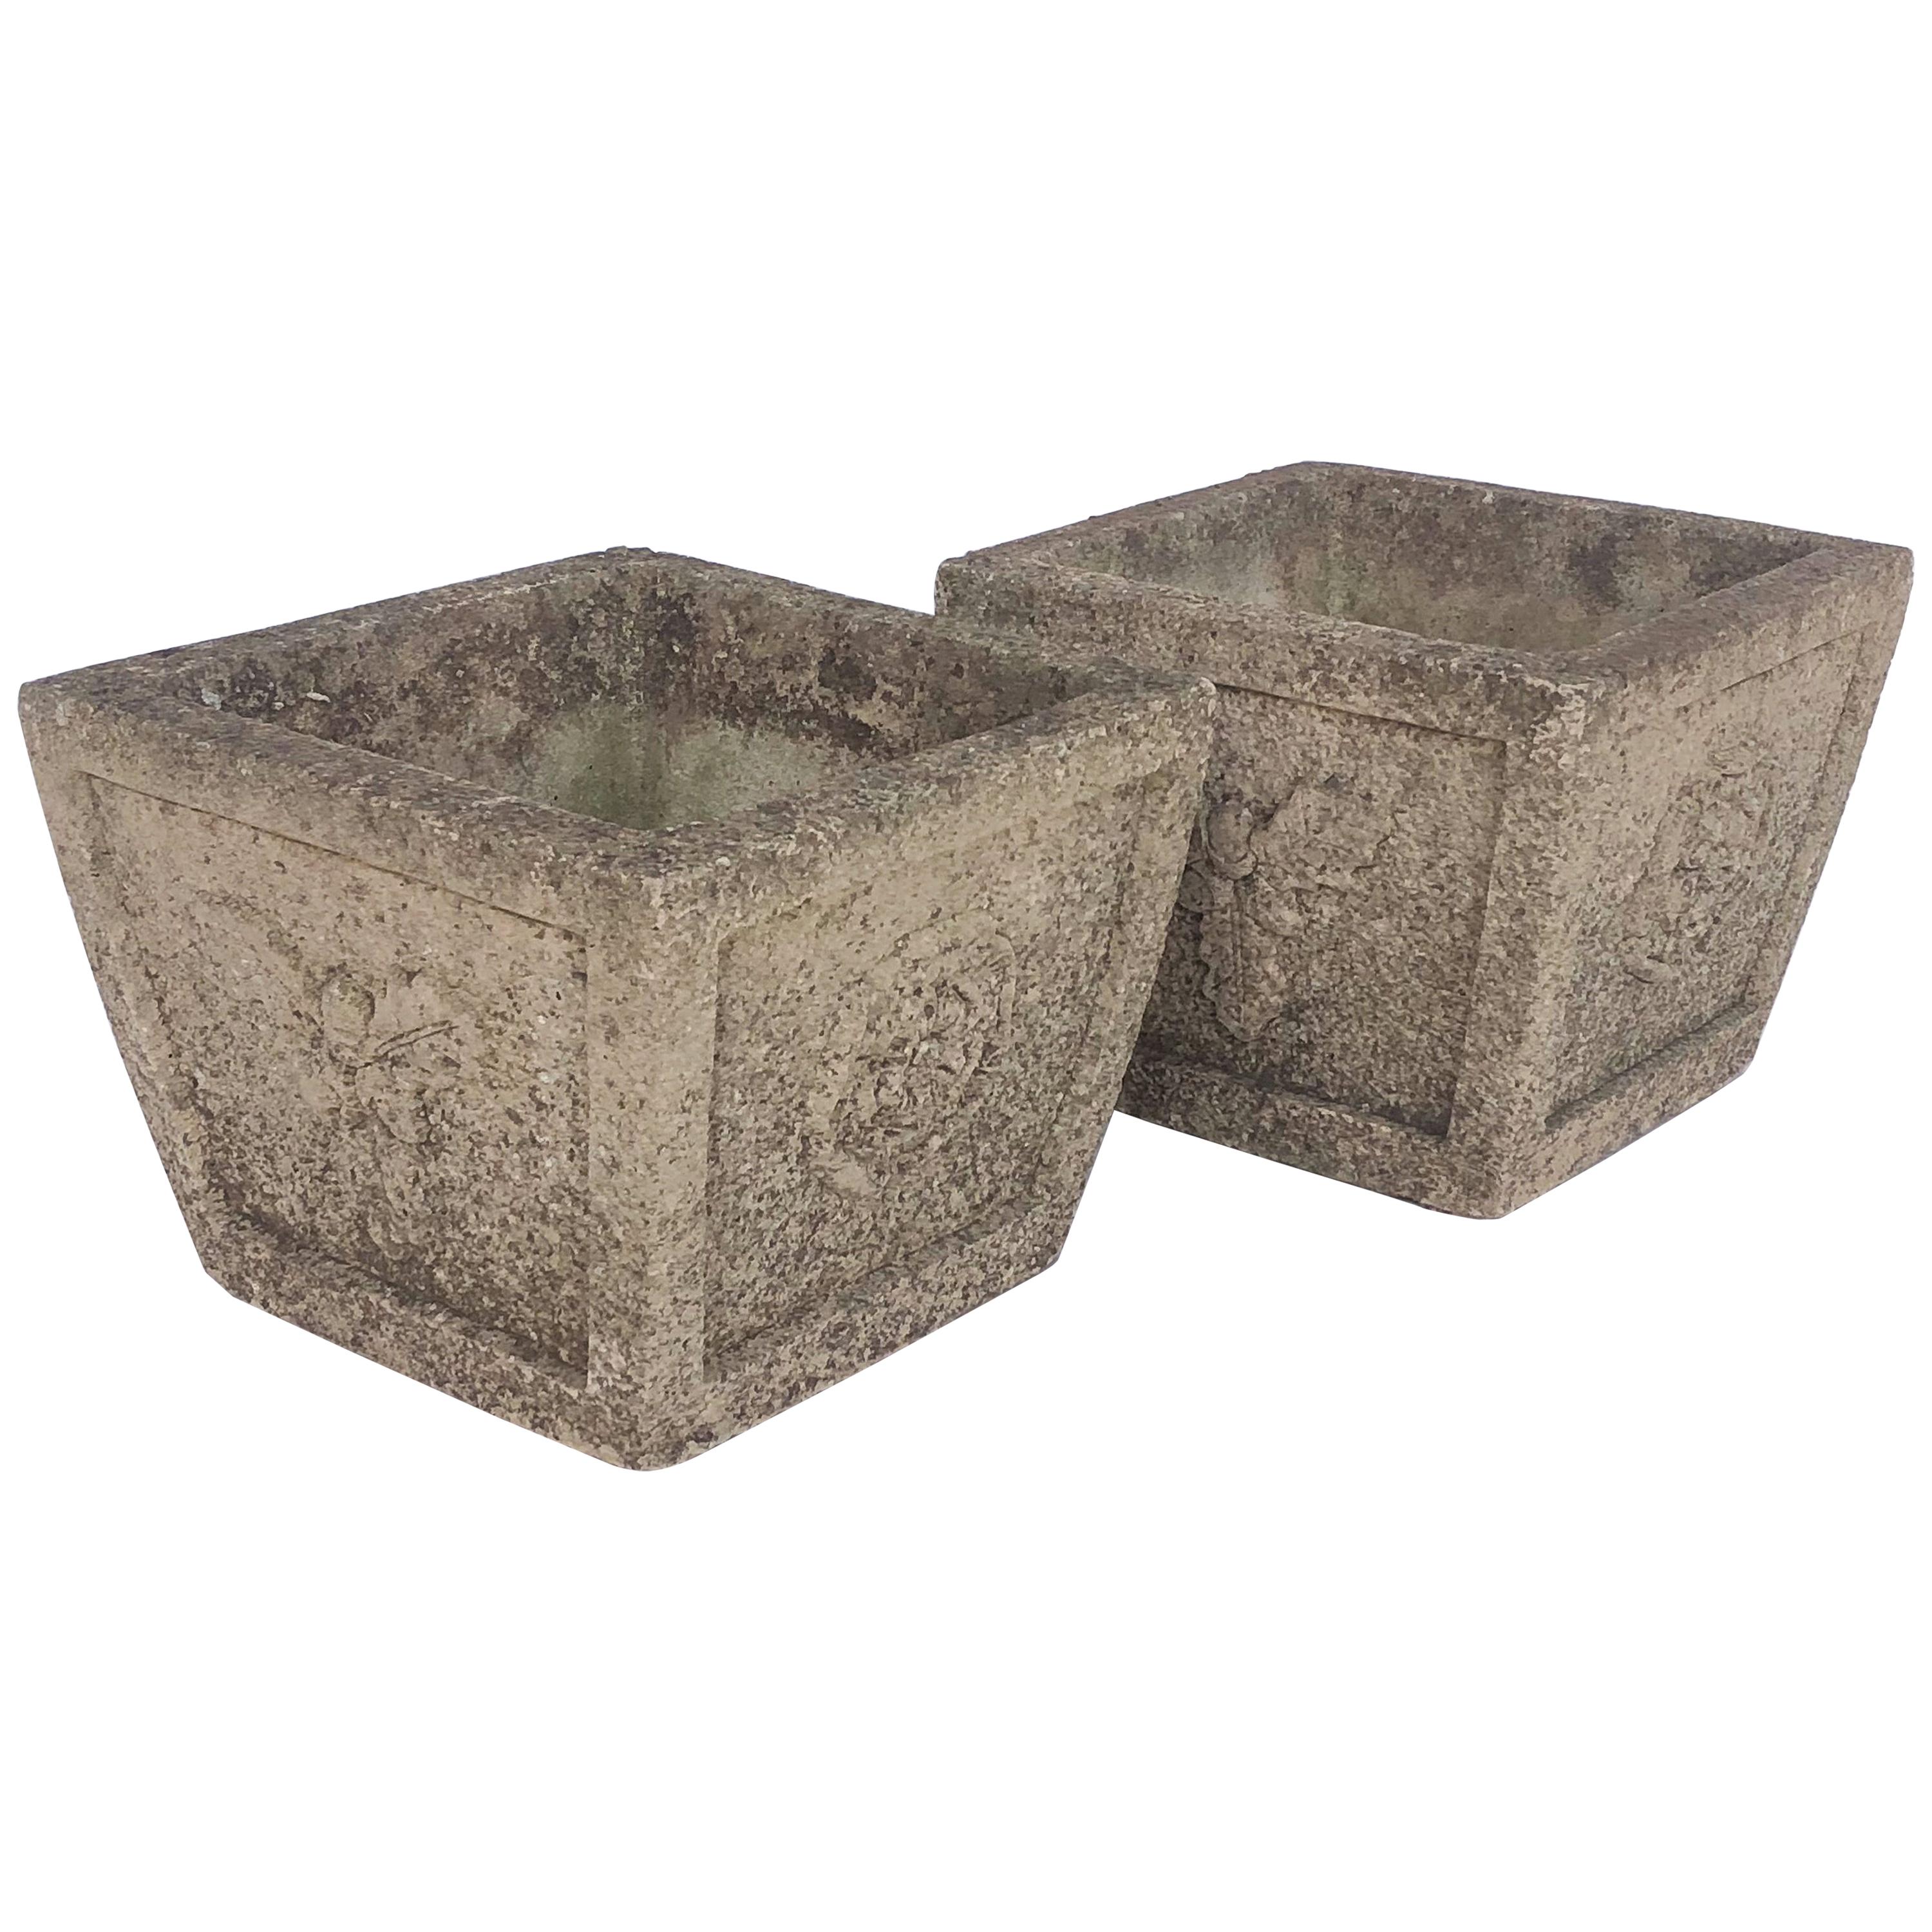 English Garden Stone Cotswold Pots or Planters 'Individually Priced'